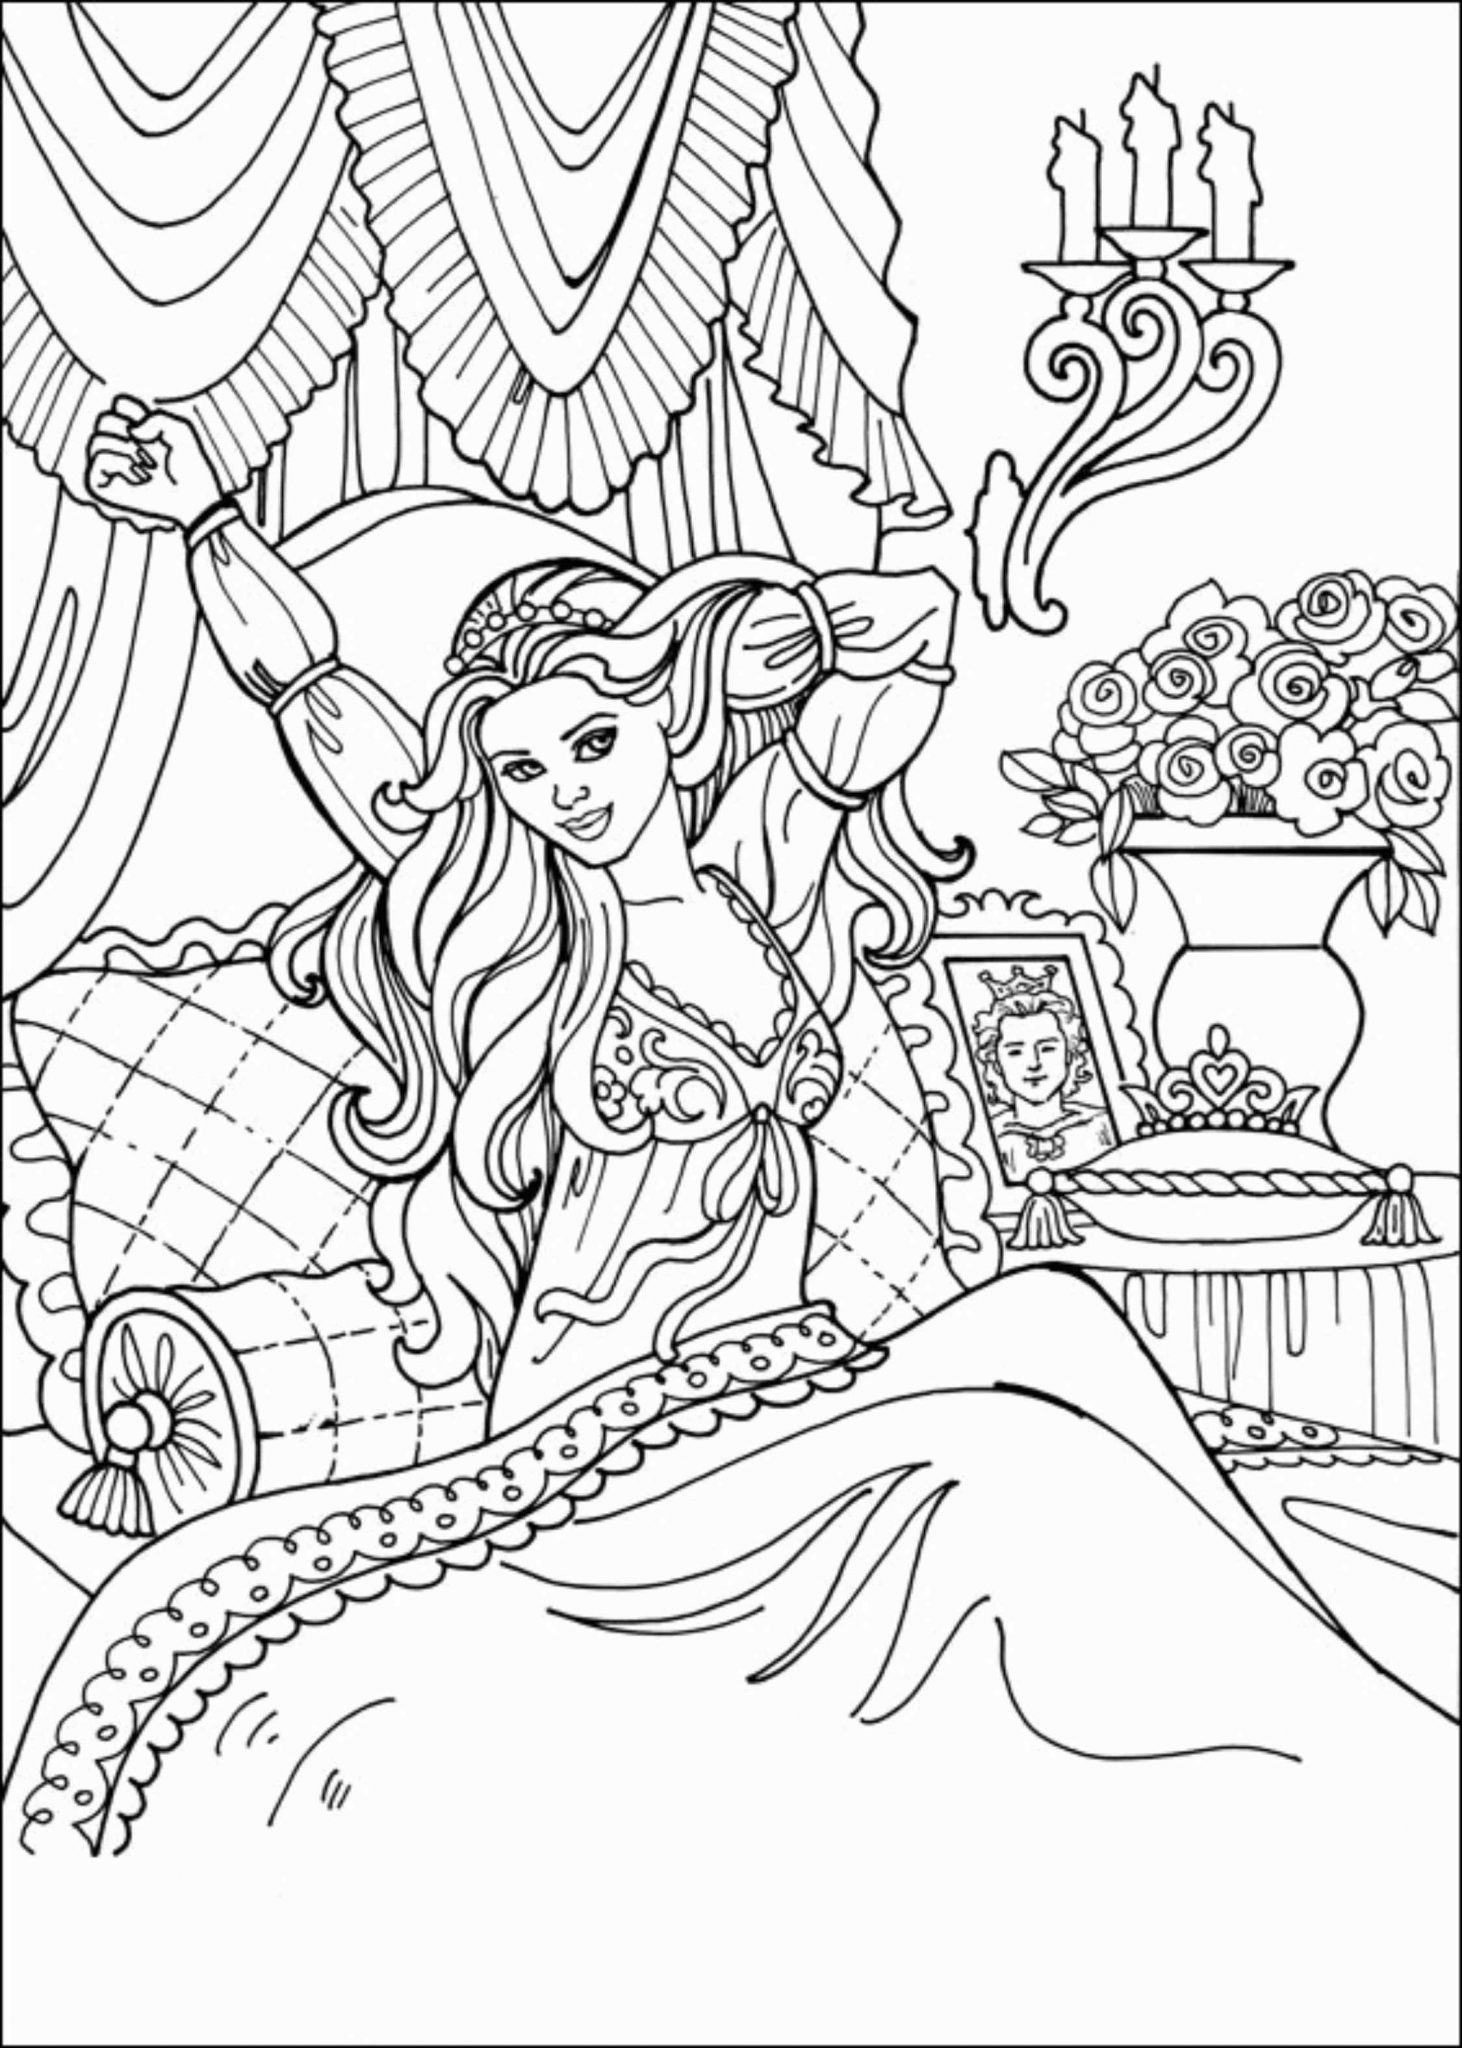 Print & Download Princess Coloring Pages, Support The Child’s Activity